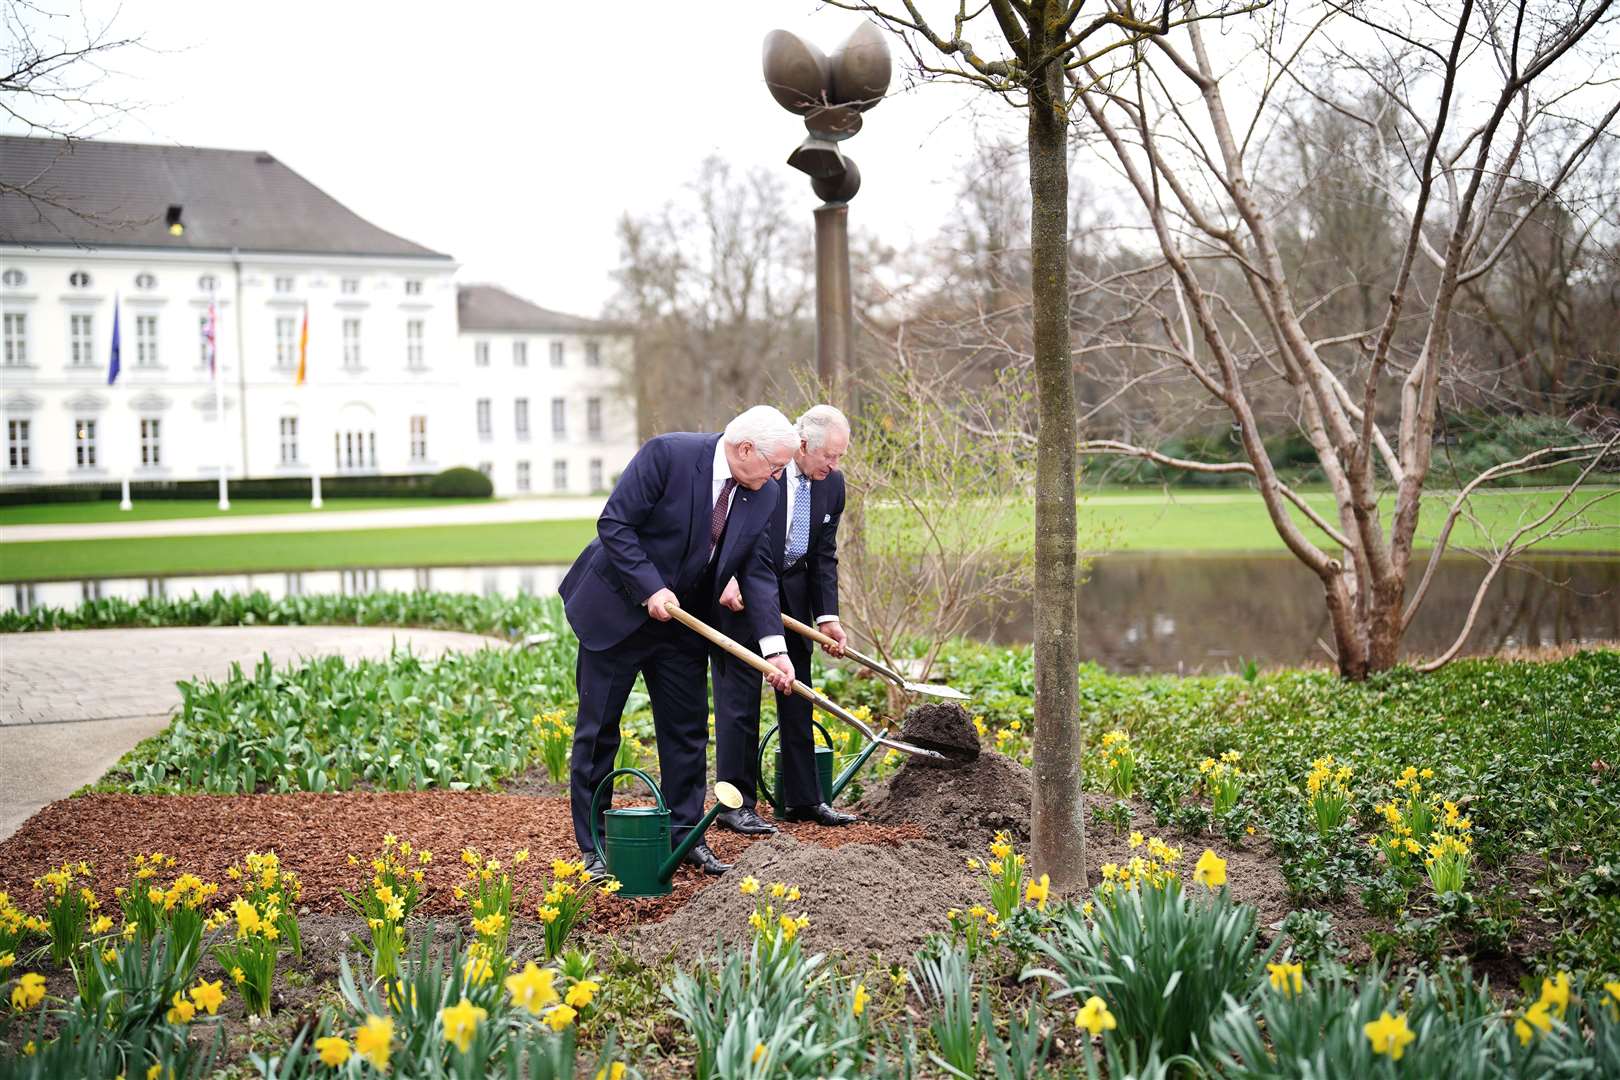 The King and German President Frank-Walter Steinmeier plant a tree after attending a Green Energy reception at Bellevue Palace, Berlin, the official residence of the President of Germany (Ben Birchall/PA)